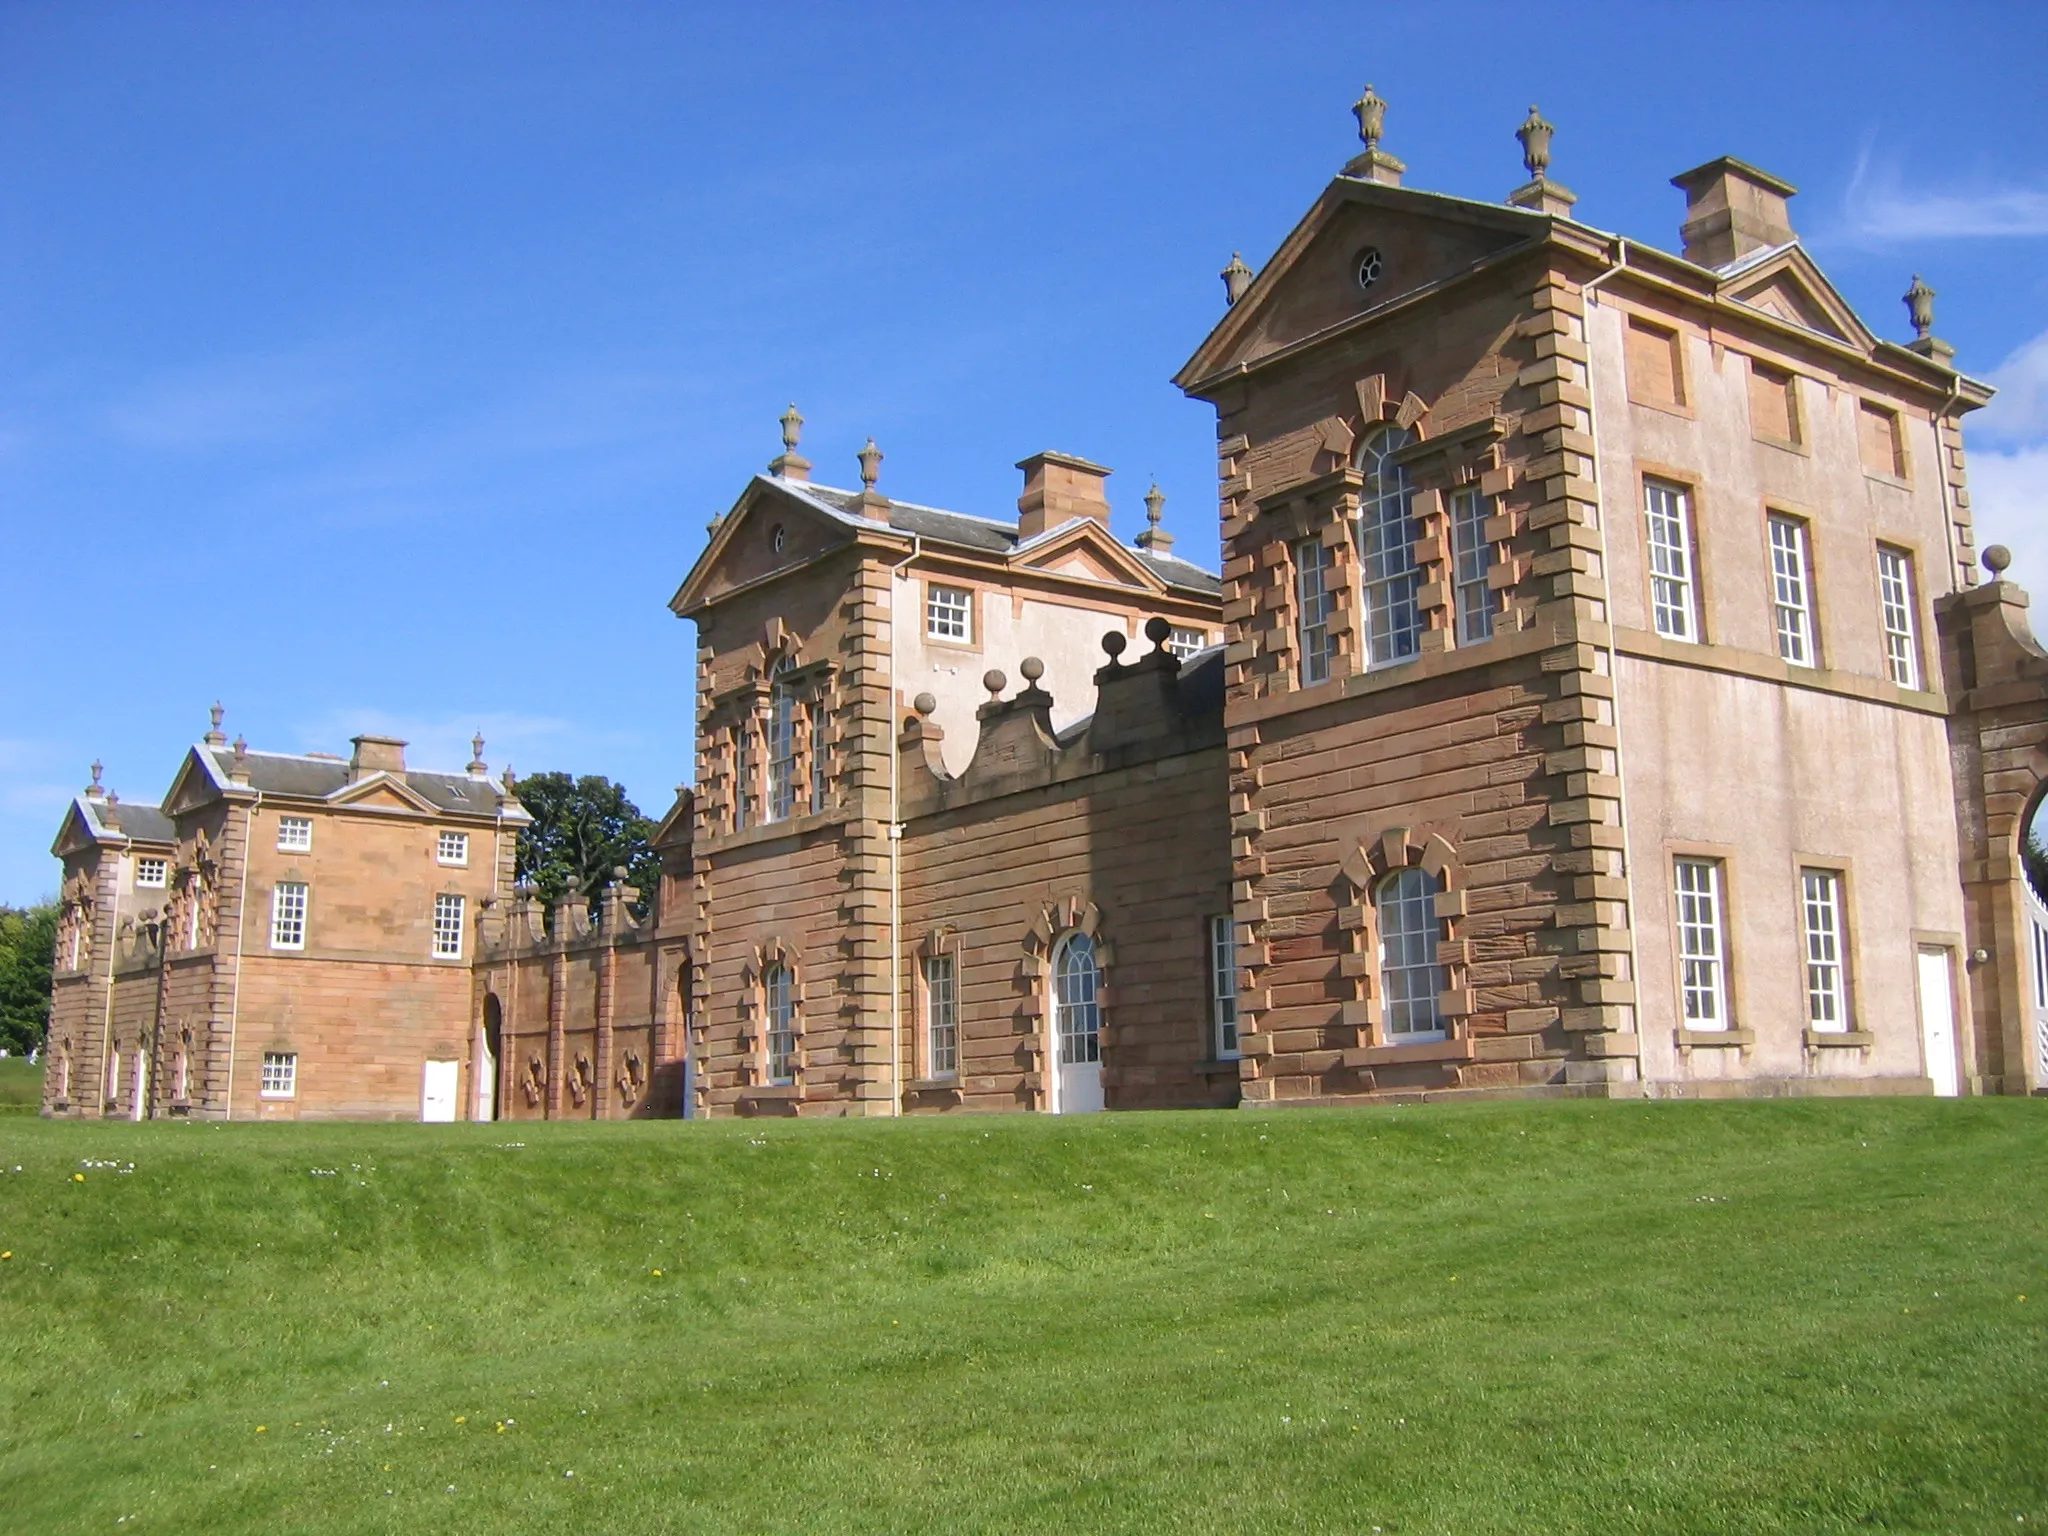 Photo showing: The Duke of Hamilton's hunting lodge in, what is now, Chatelherault Country Park.  Taken by me, Alistair McMillan, on 15 May 2005.